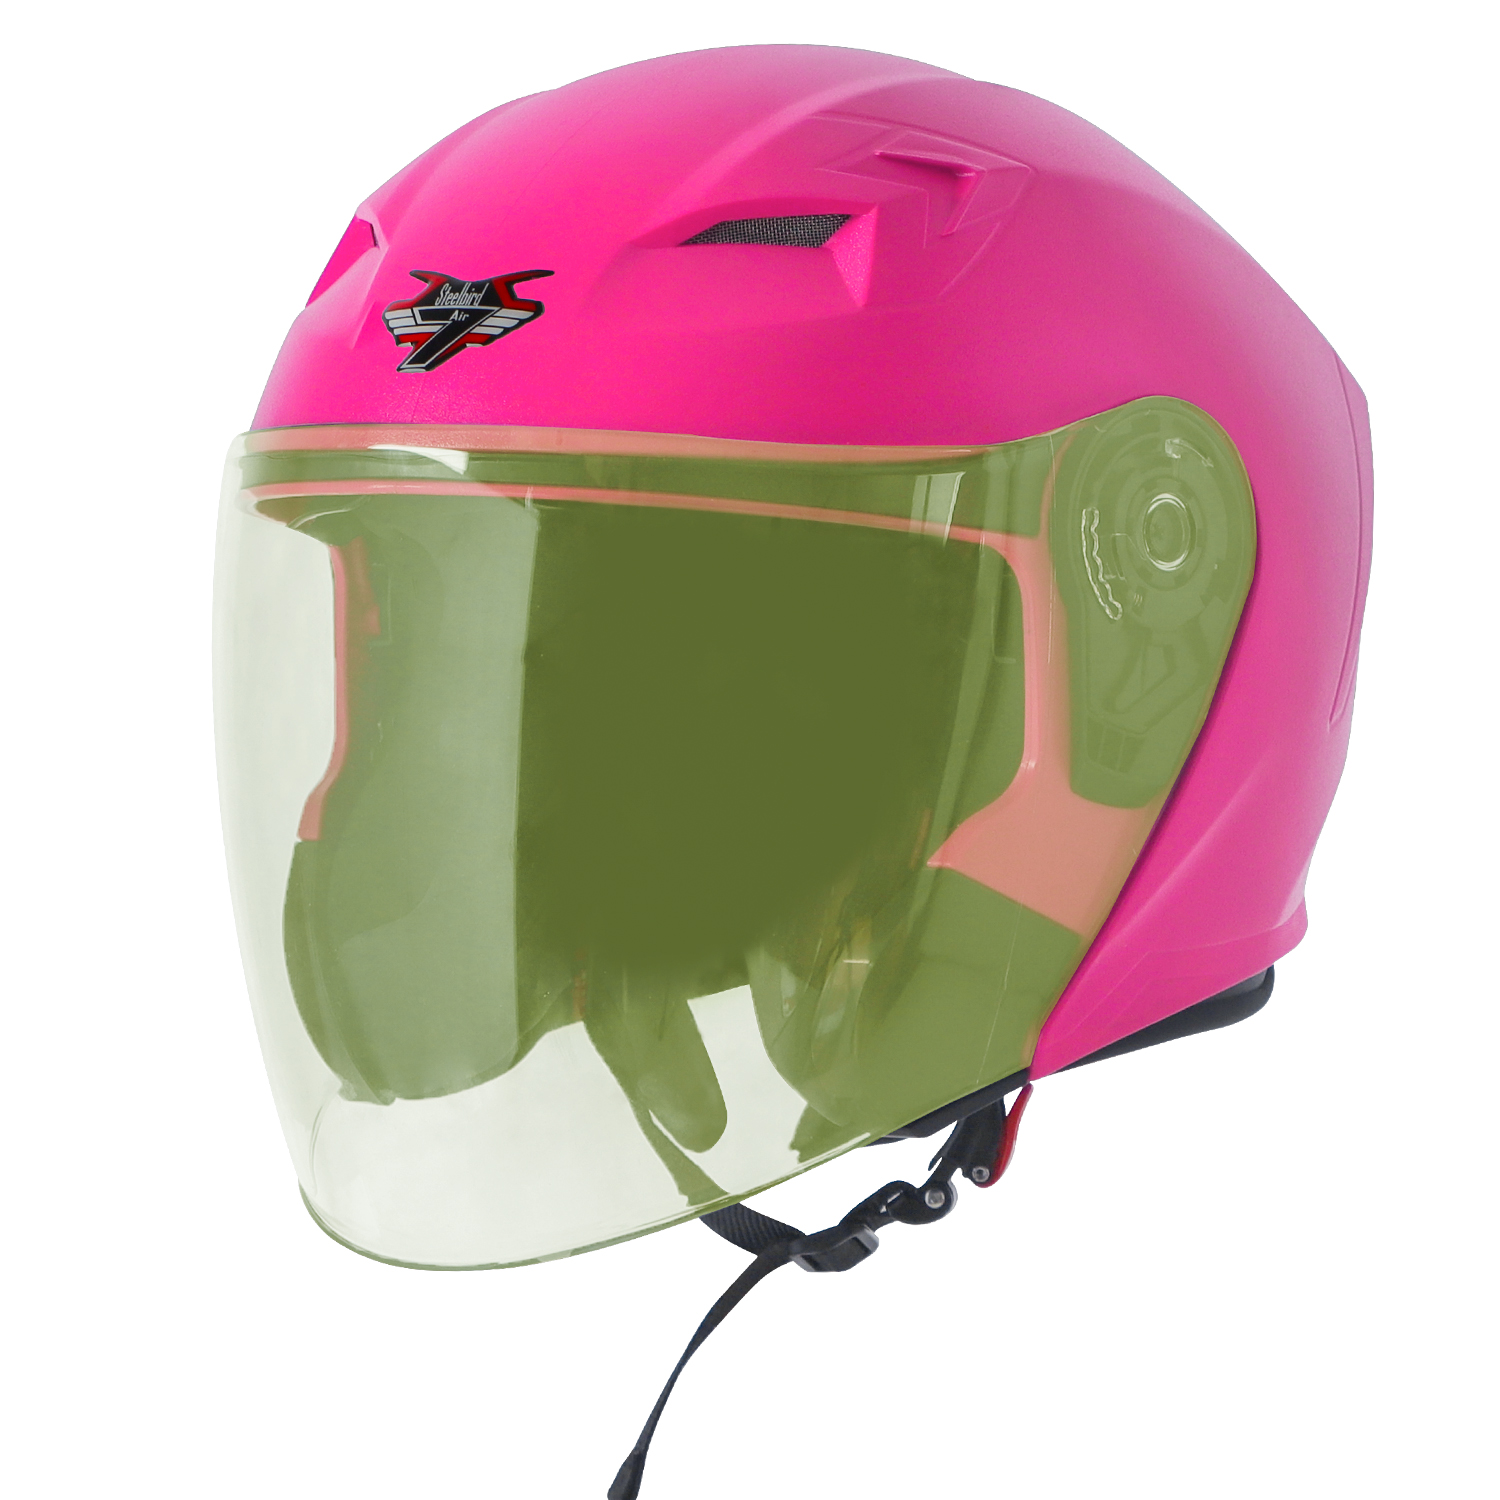 Steelbird SBA-17 7Wings ISI Certified Open Face Helmet For Men And Women (Dashing Pink With Tinted Yellow Visor)